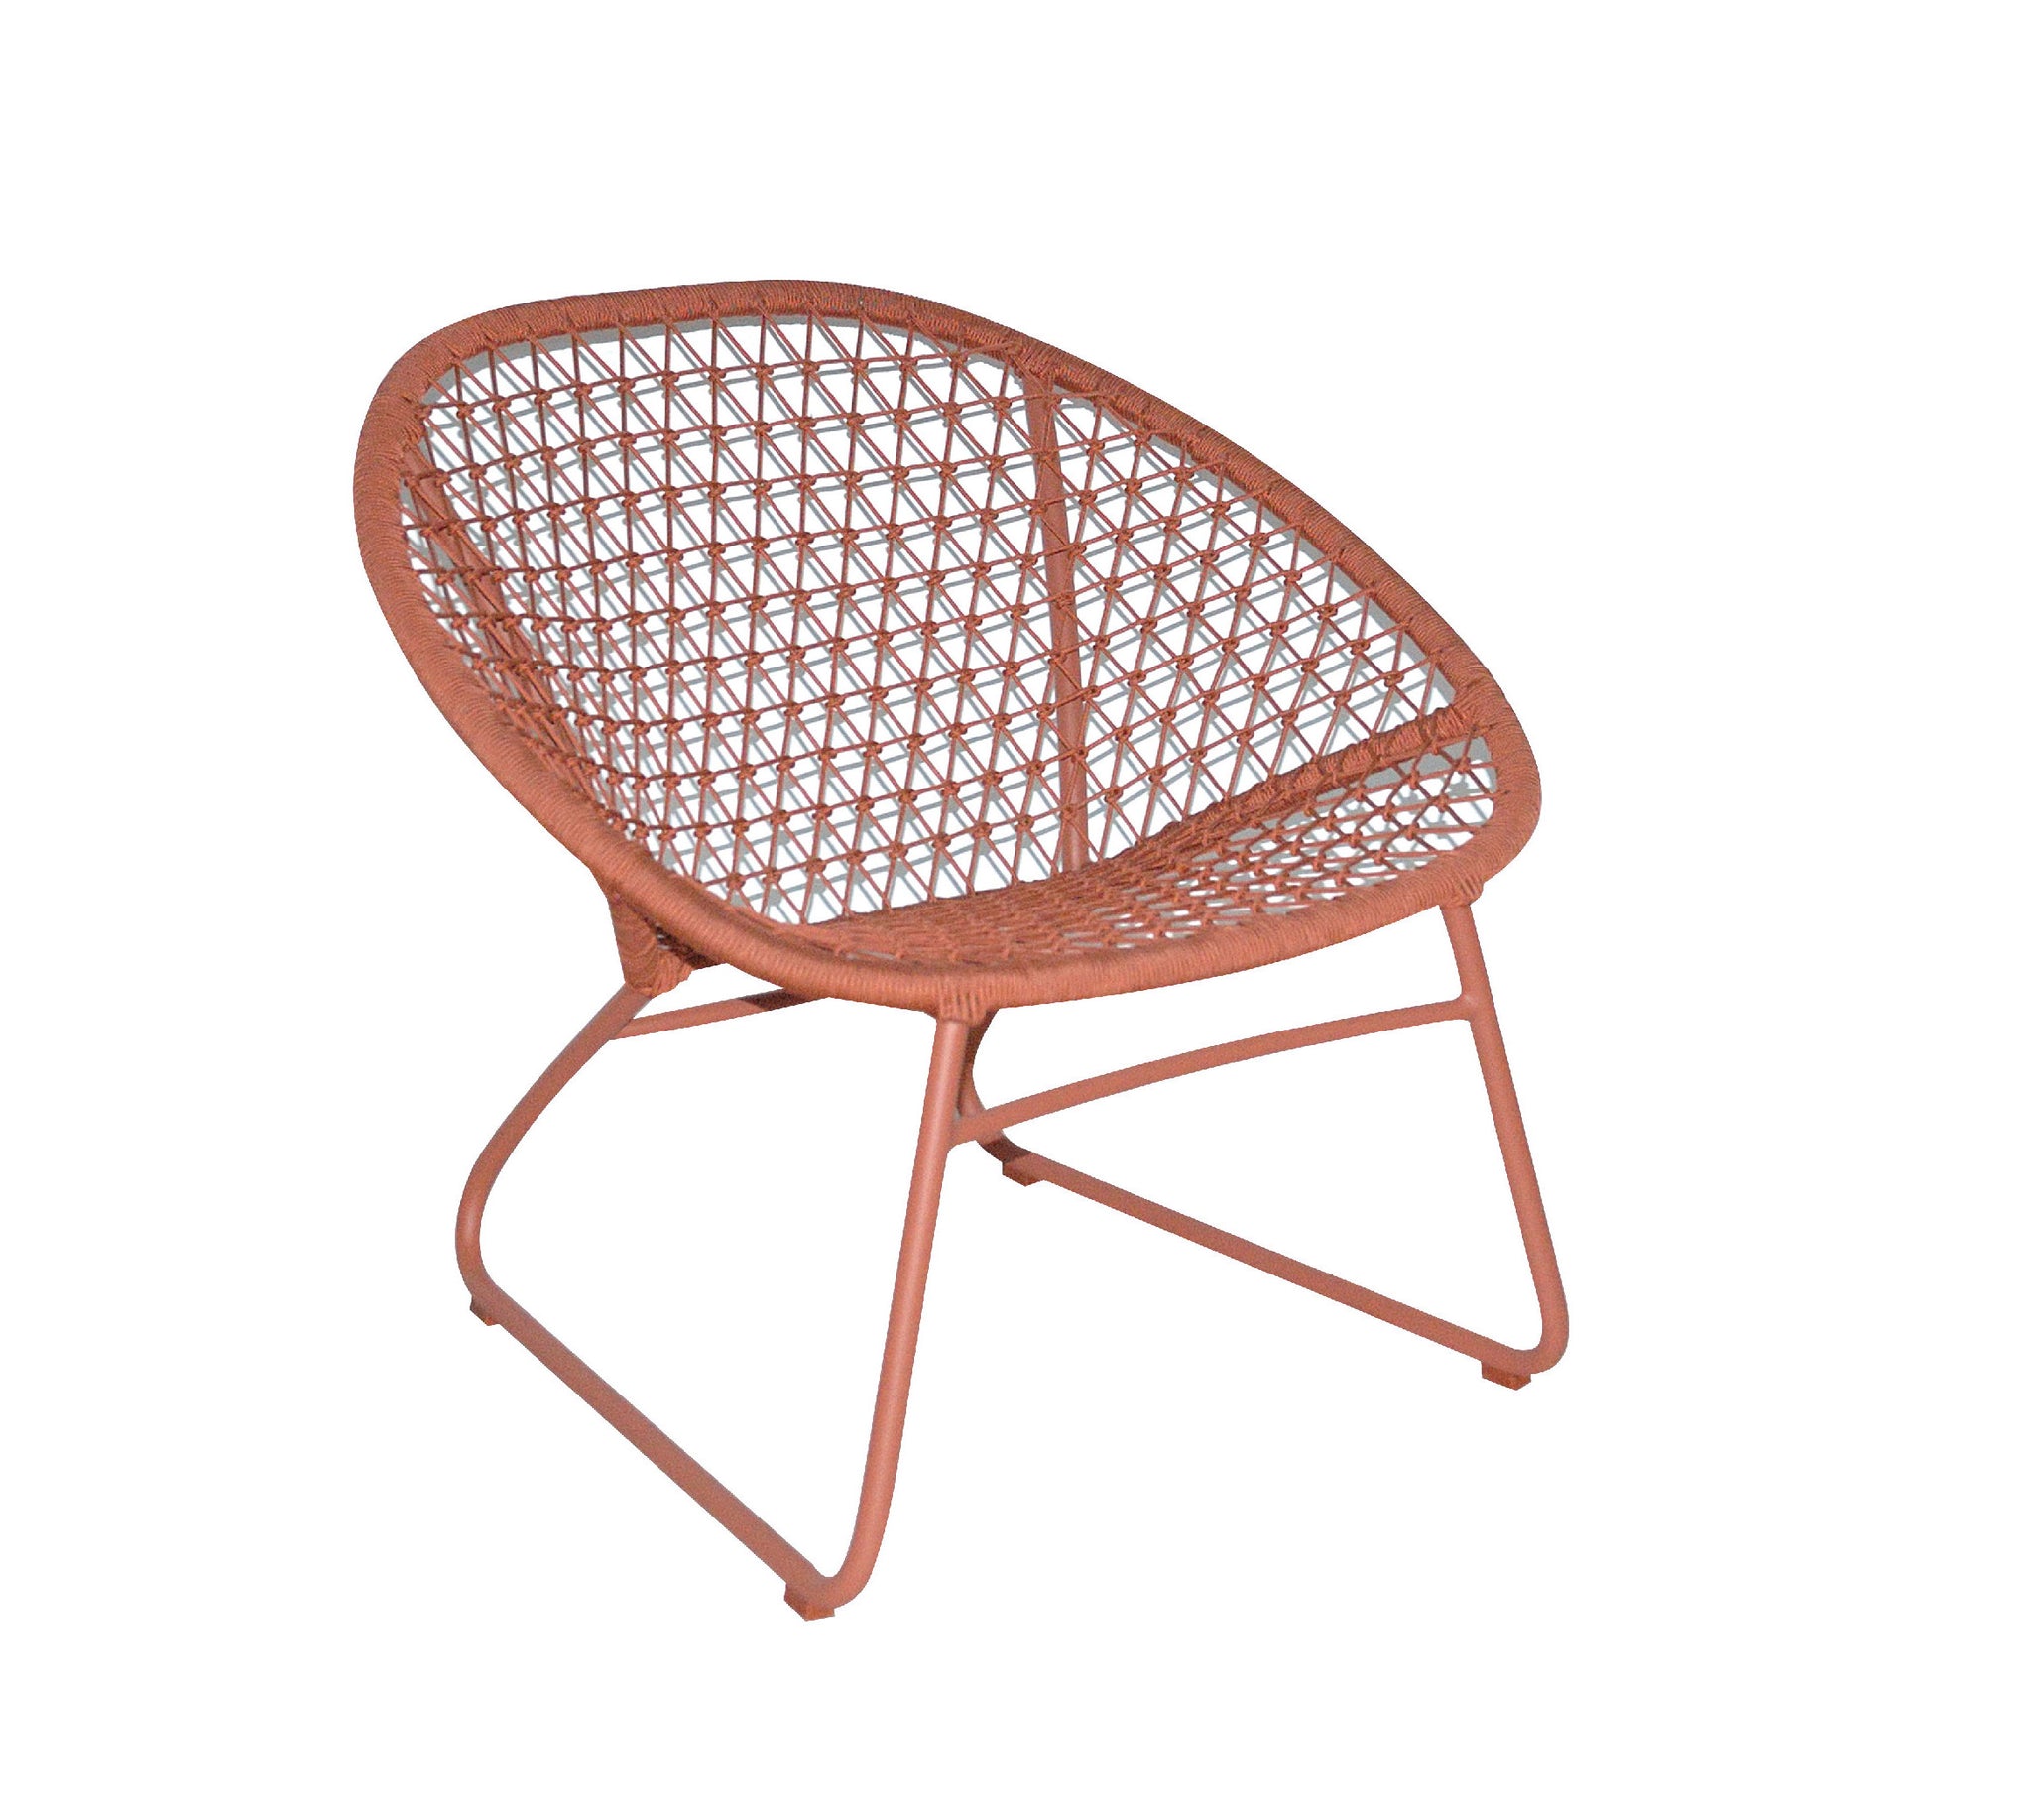 A Coral Outdoor Chair